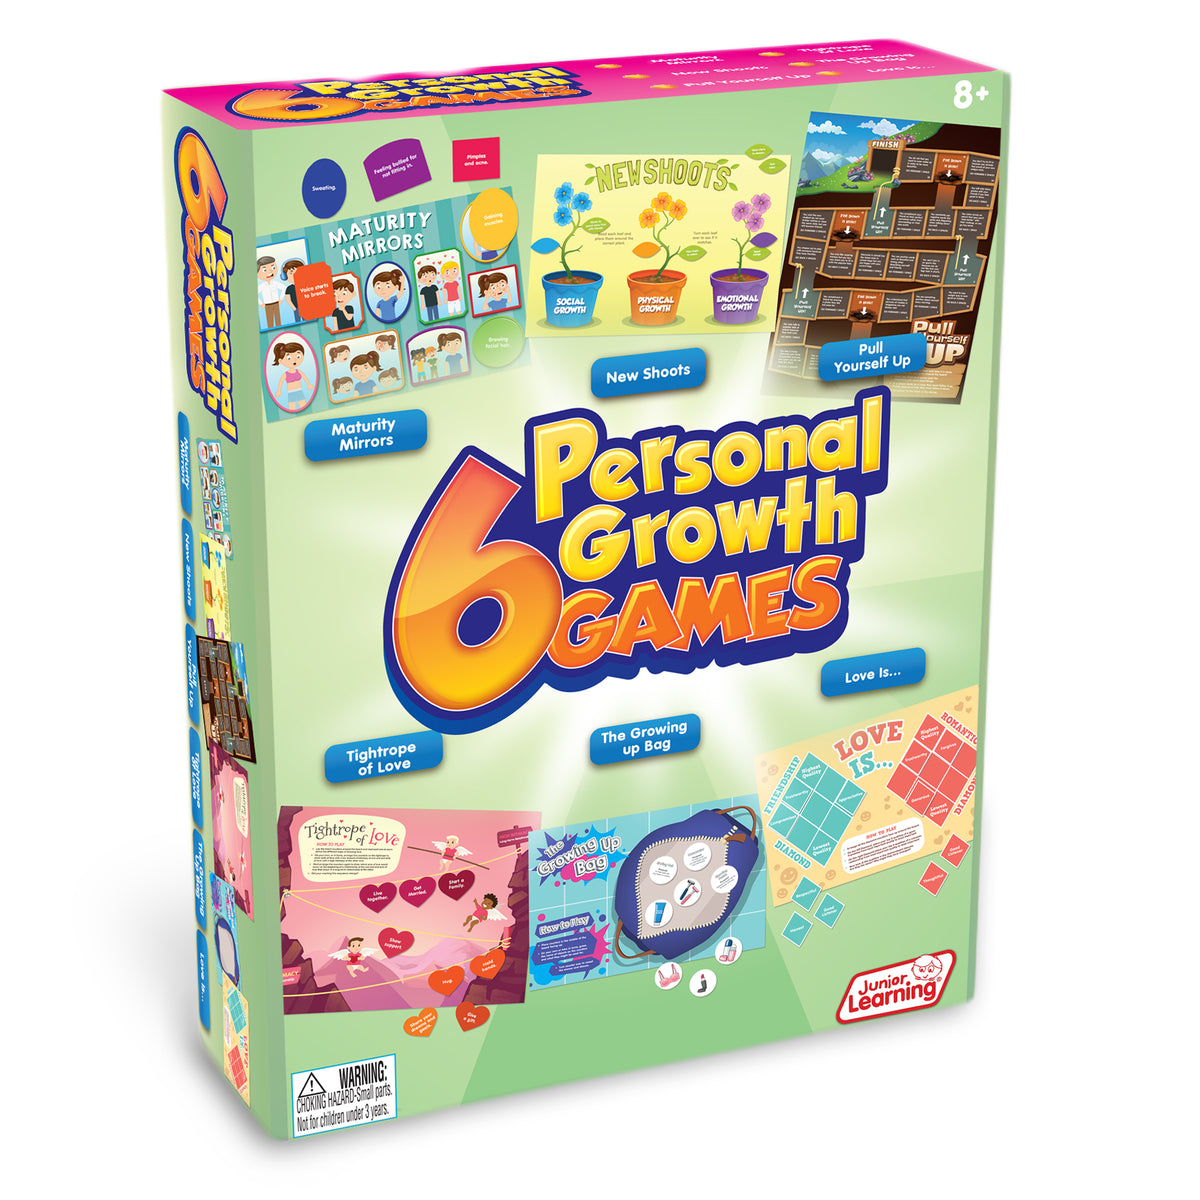 Junior Learning JL416 6 Personal Growth Games box faced right